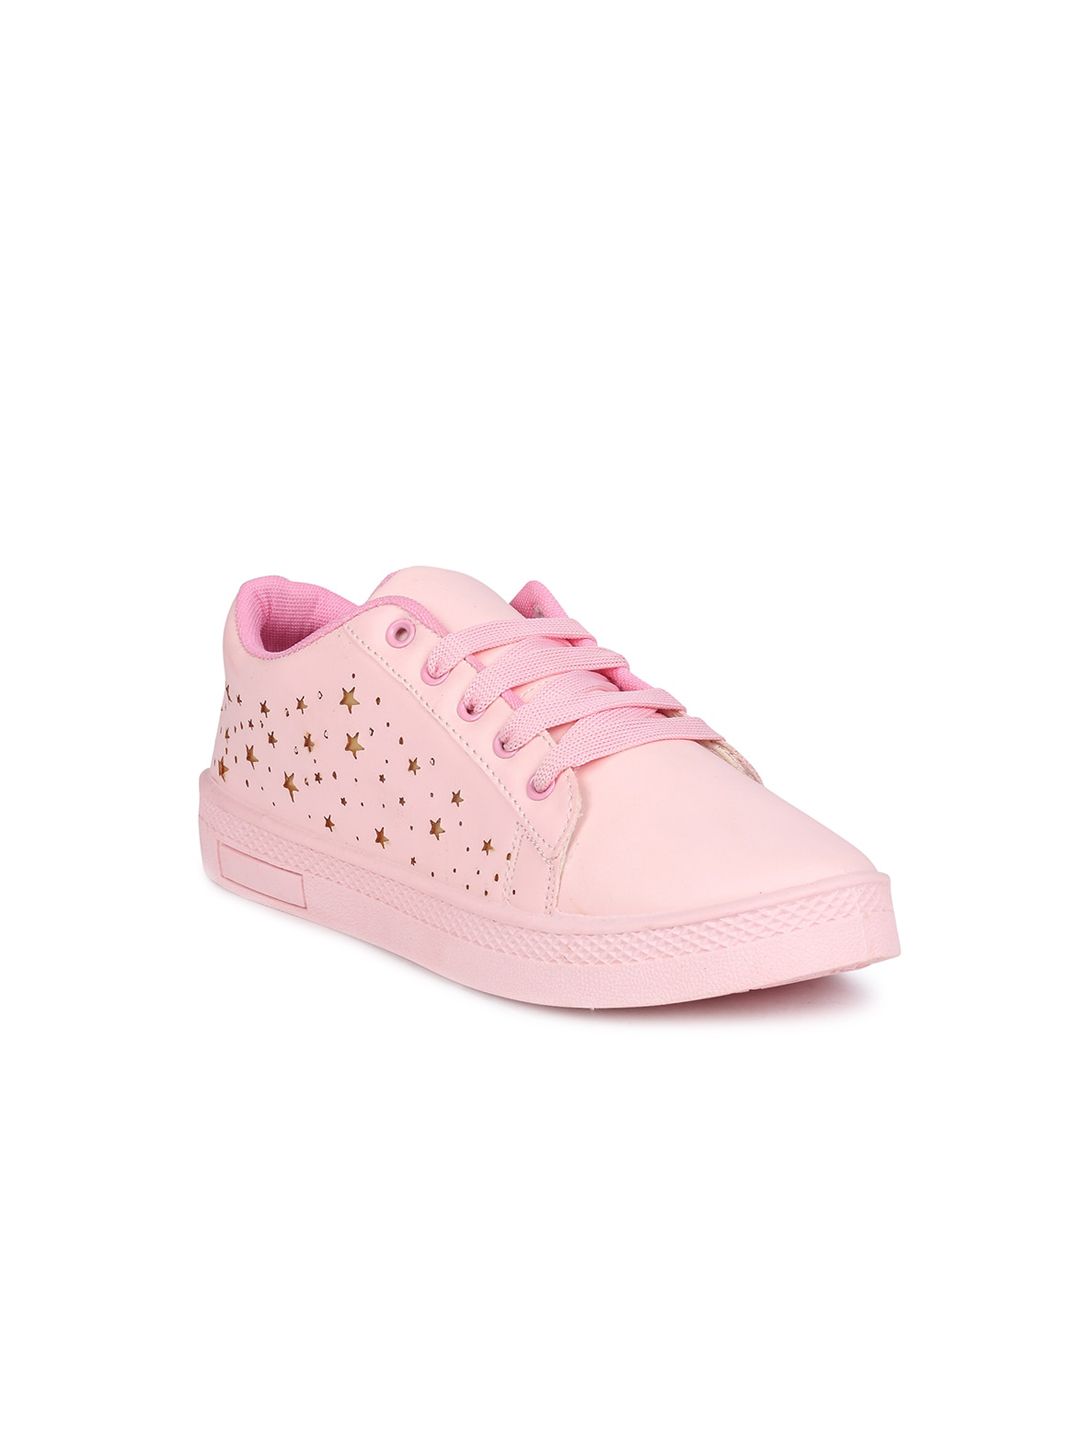 M7 by Metronaut Women Pink Printed Sneakers Price in India